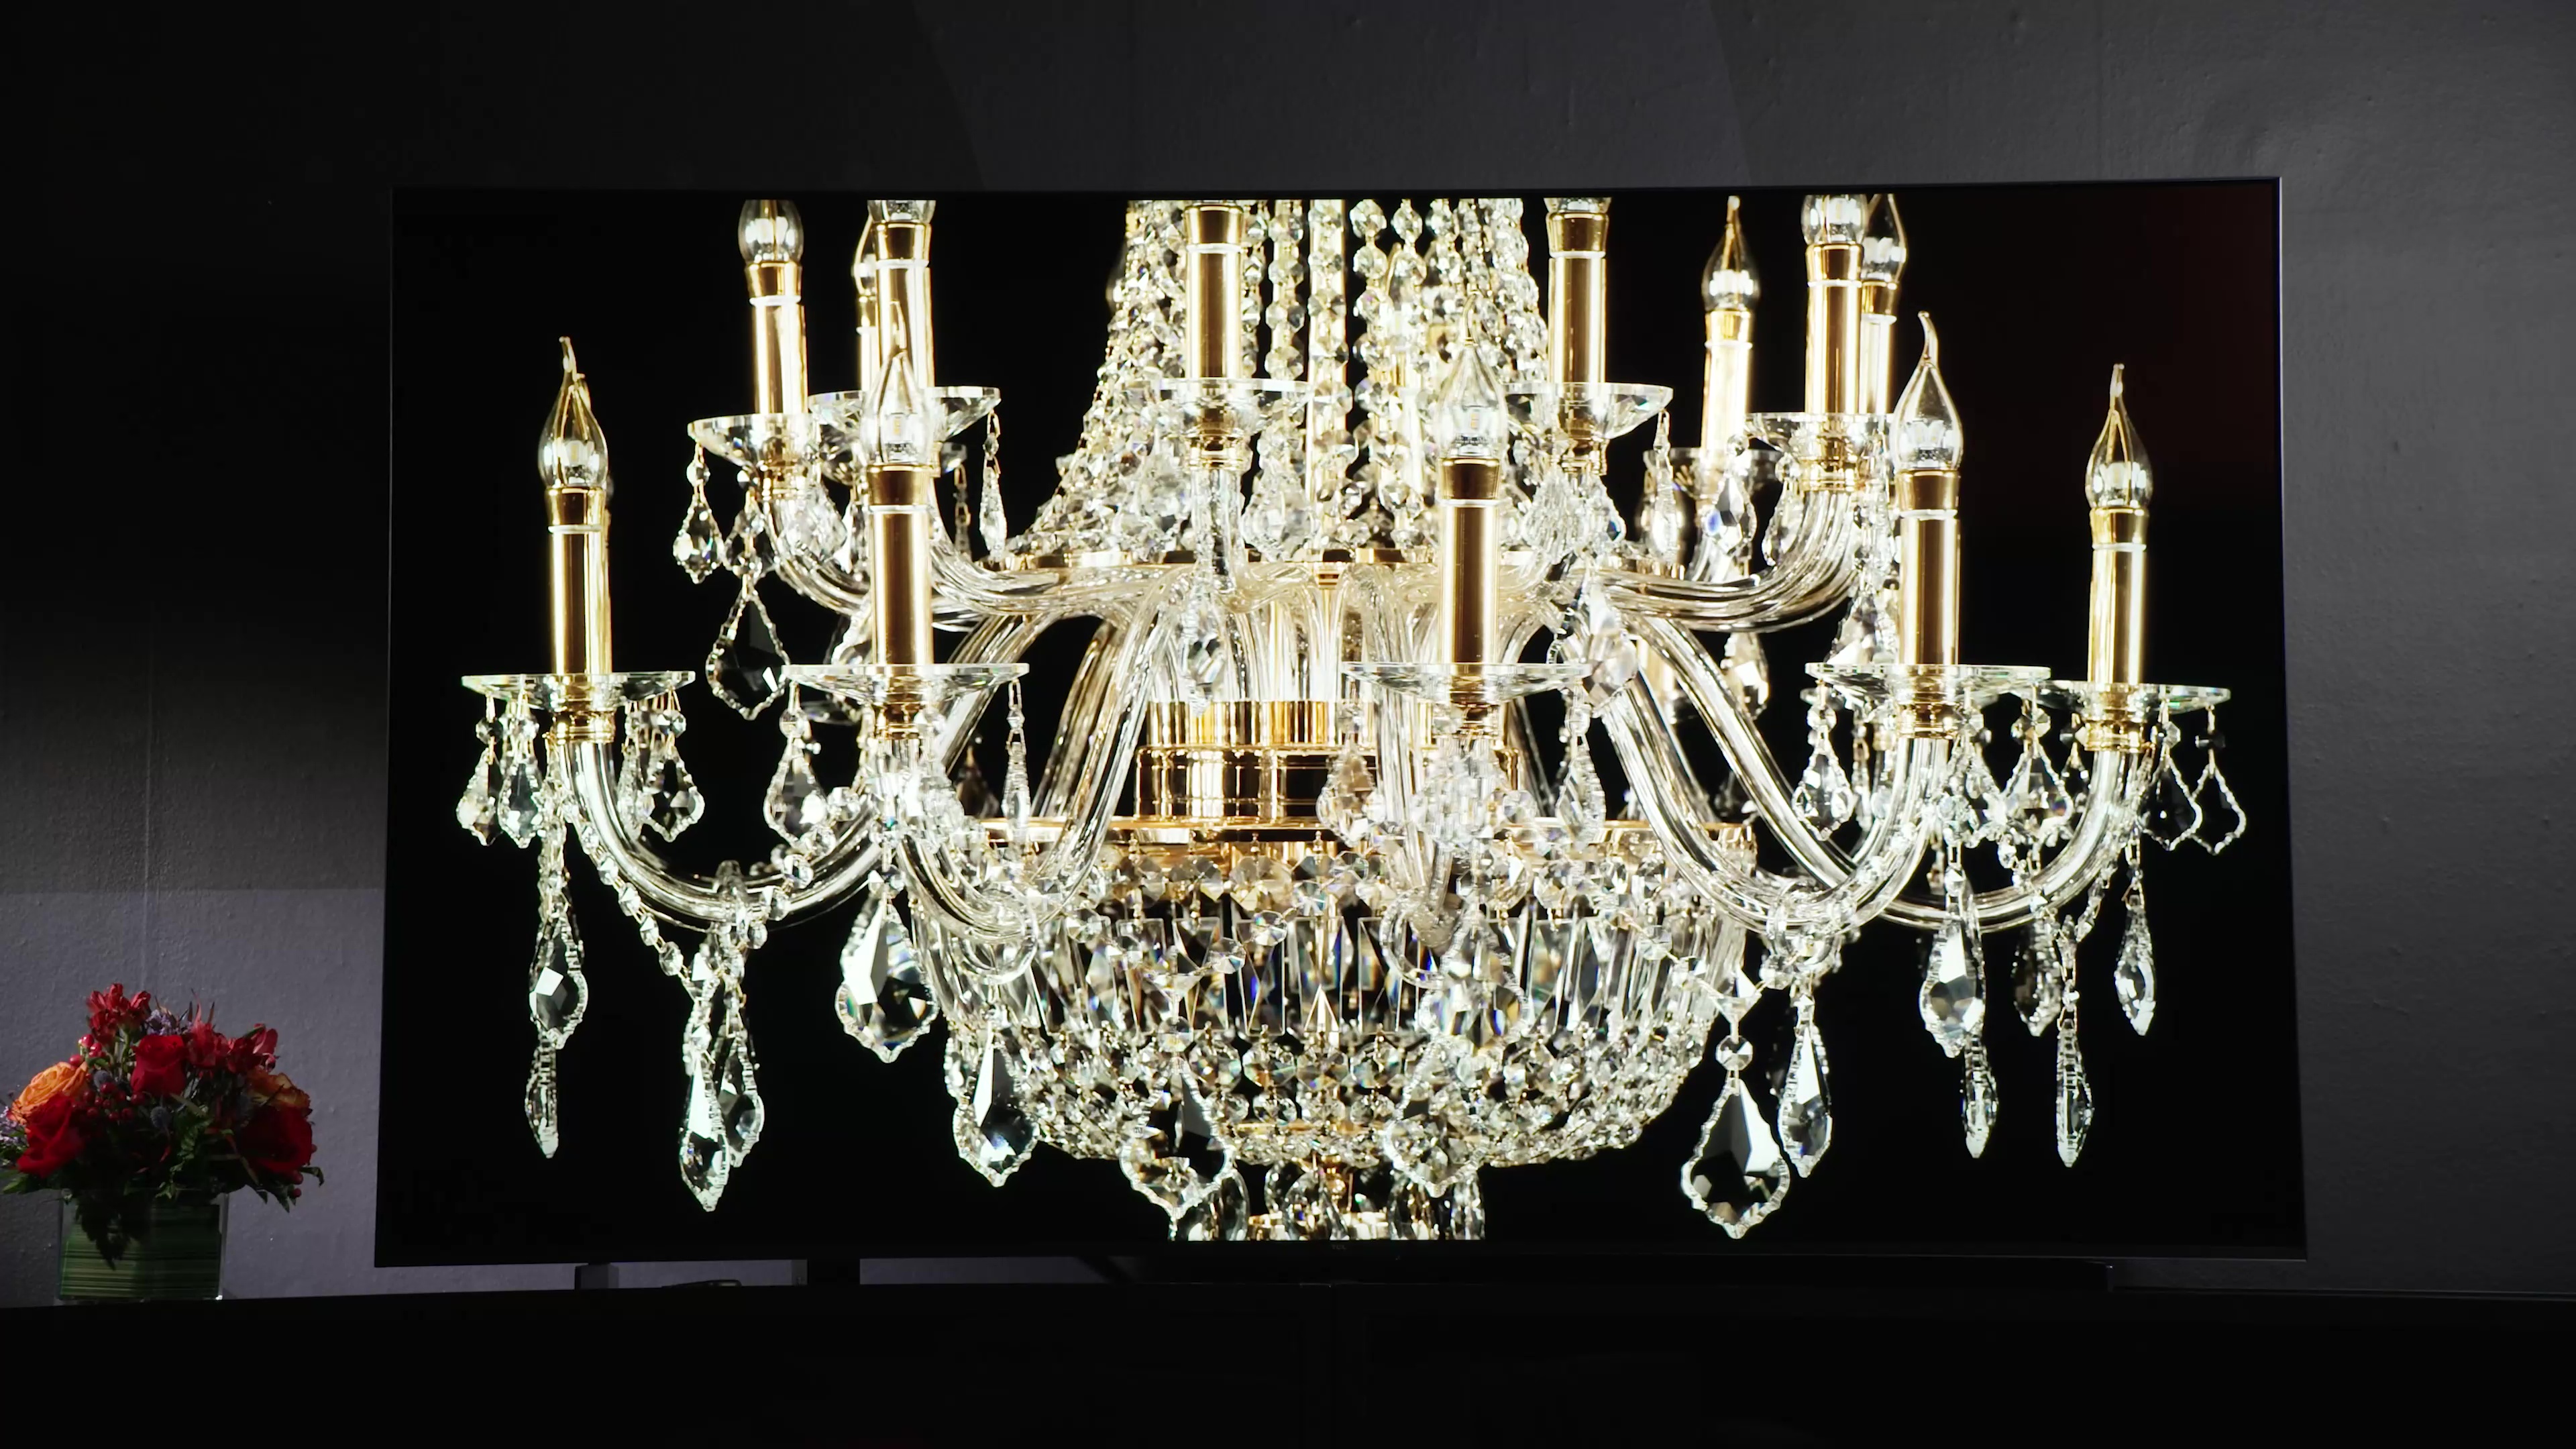 A crystal chandelier displayed on a TCL QM8 Mini-LED TV.